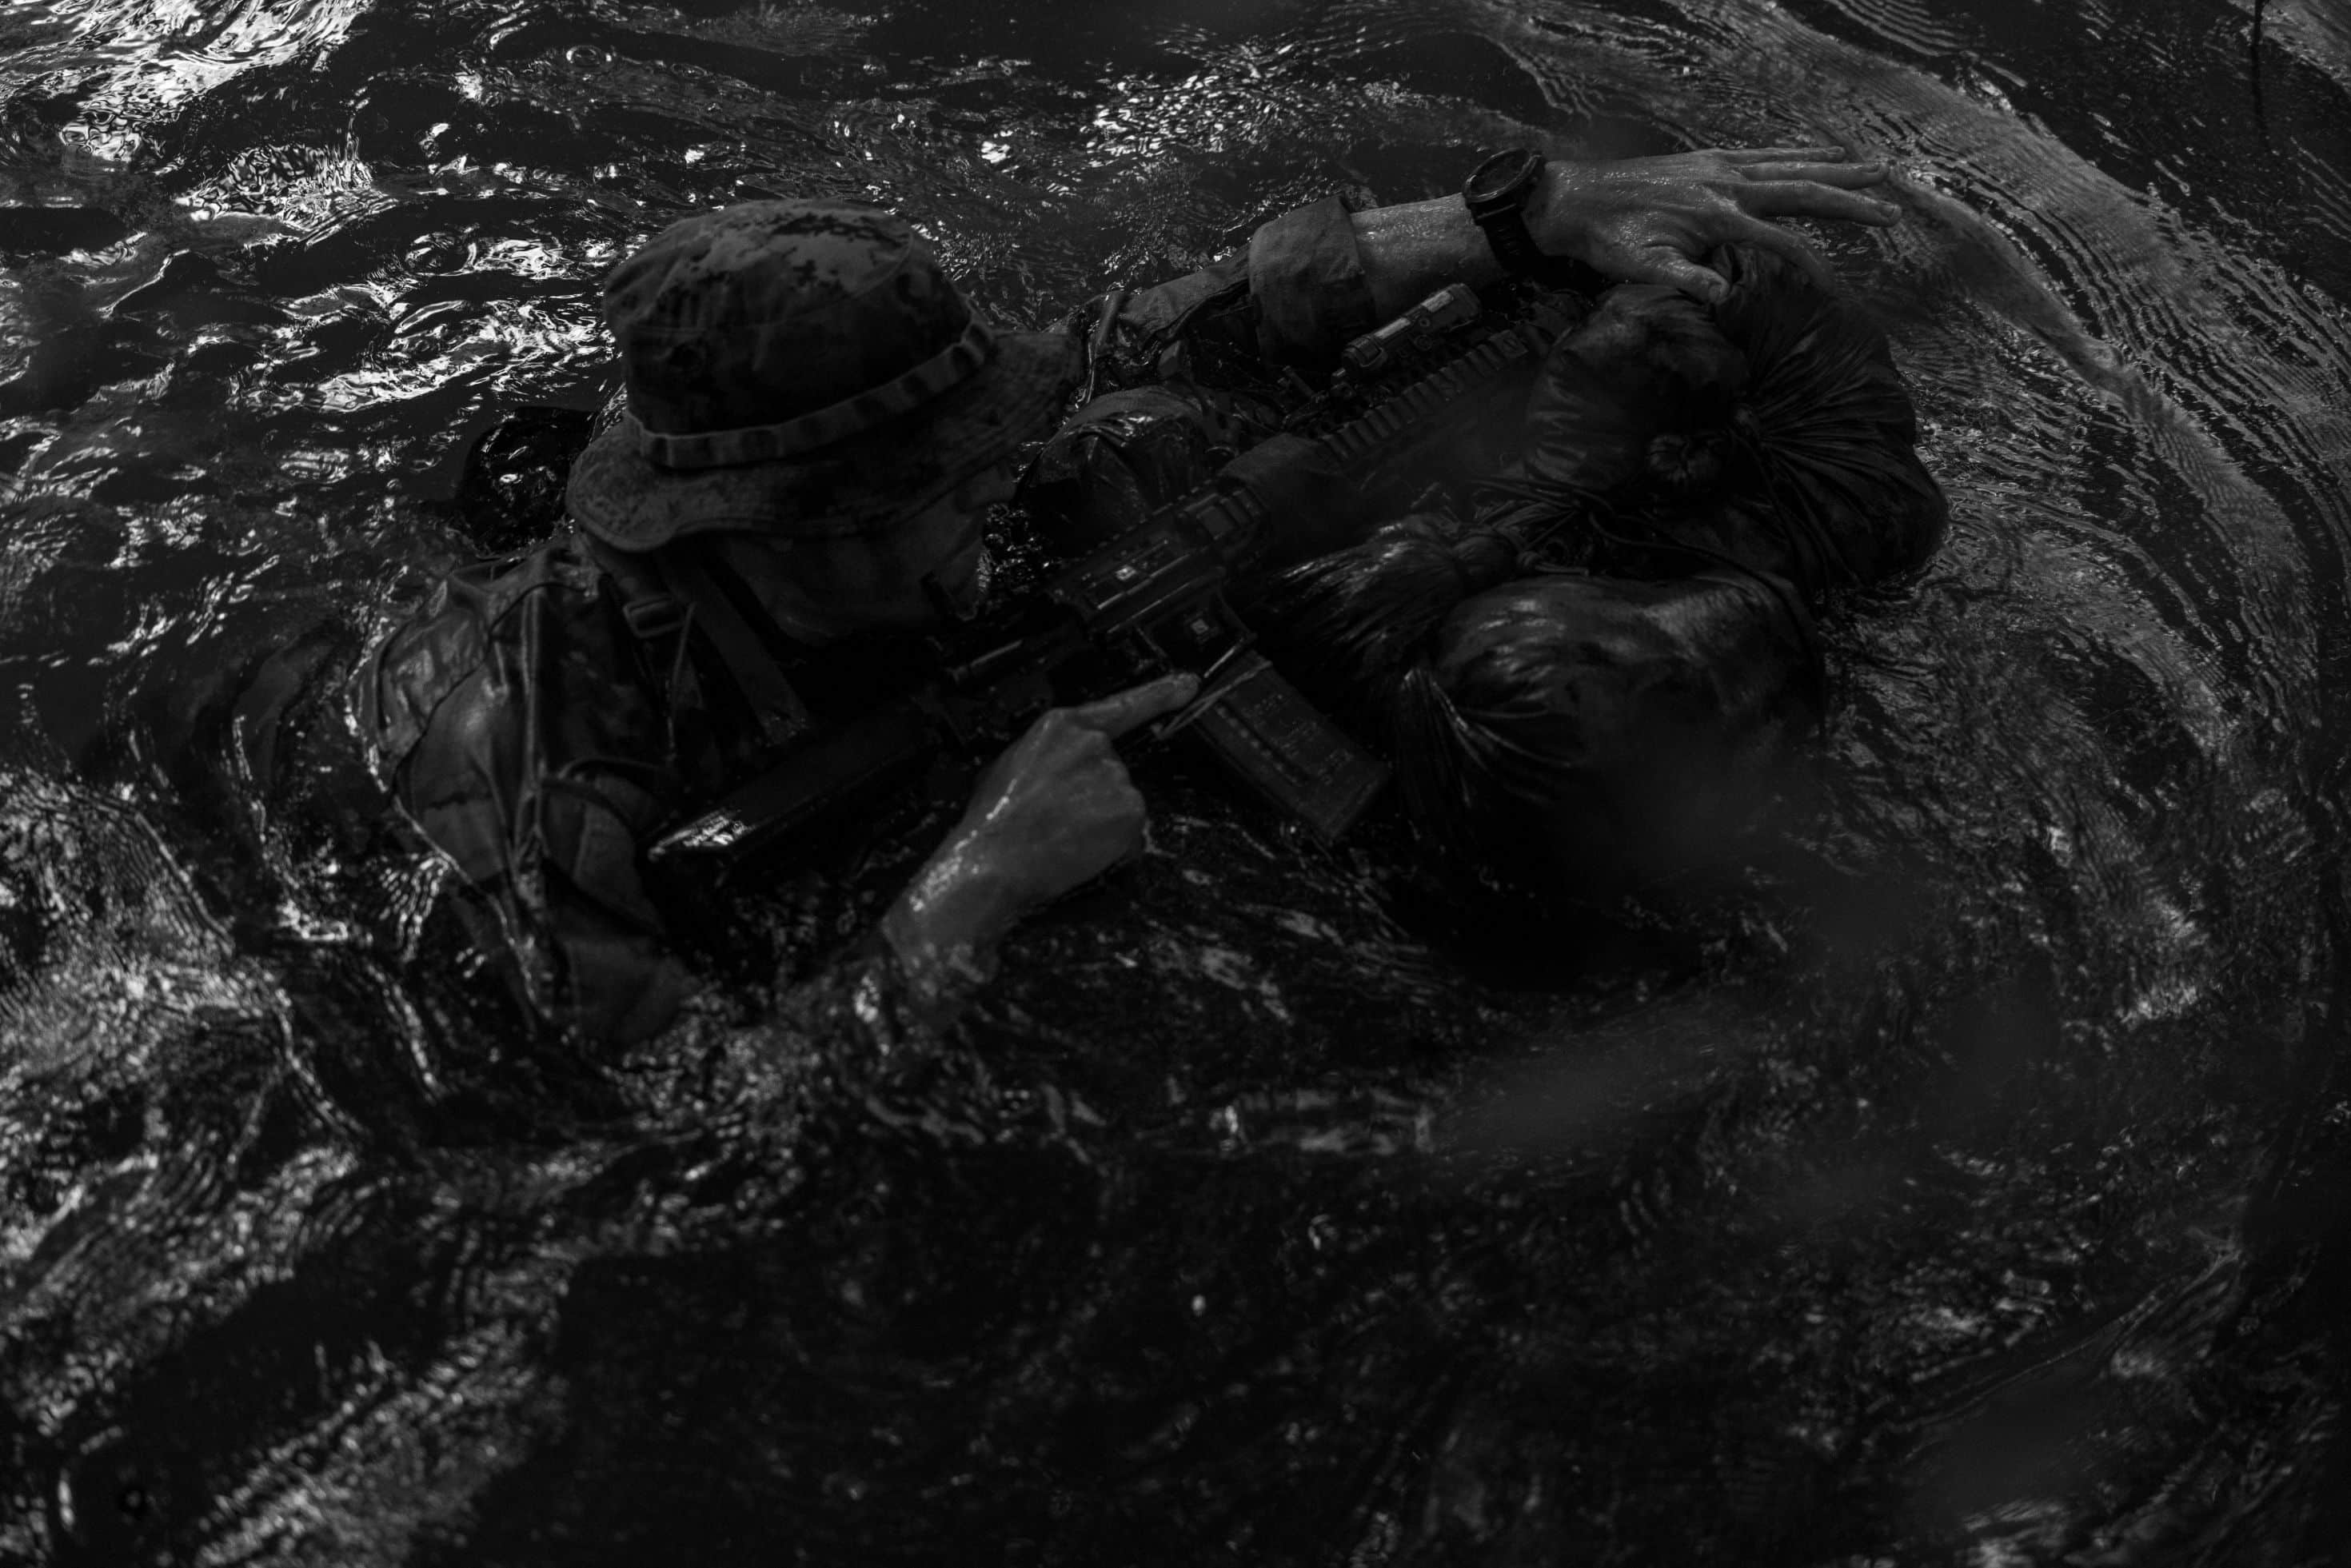 A Marine Raider with Marine Forces Special Operations Command traverses a river during a jungle mobility course, Aug. 4, 2023. Marine Raiders in the training program learned to maneuver in a jungle environment, conceal their movements, and track adversary movements. (U.S. Marine Corps photo by Cpl. Henry Rodriguez) (This photo was edited in black and white for artistic purposes)